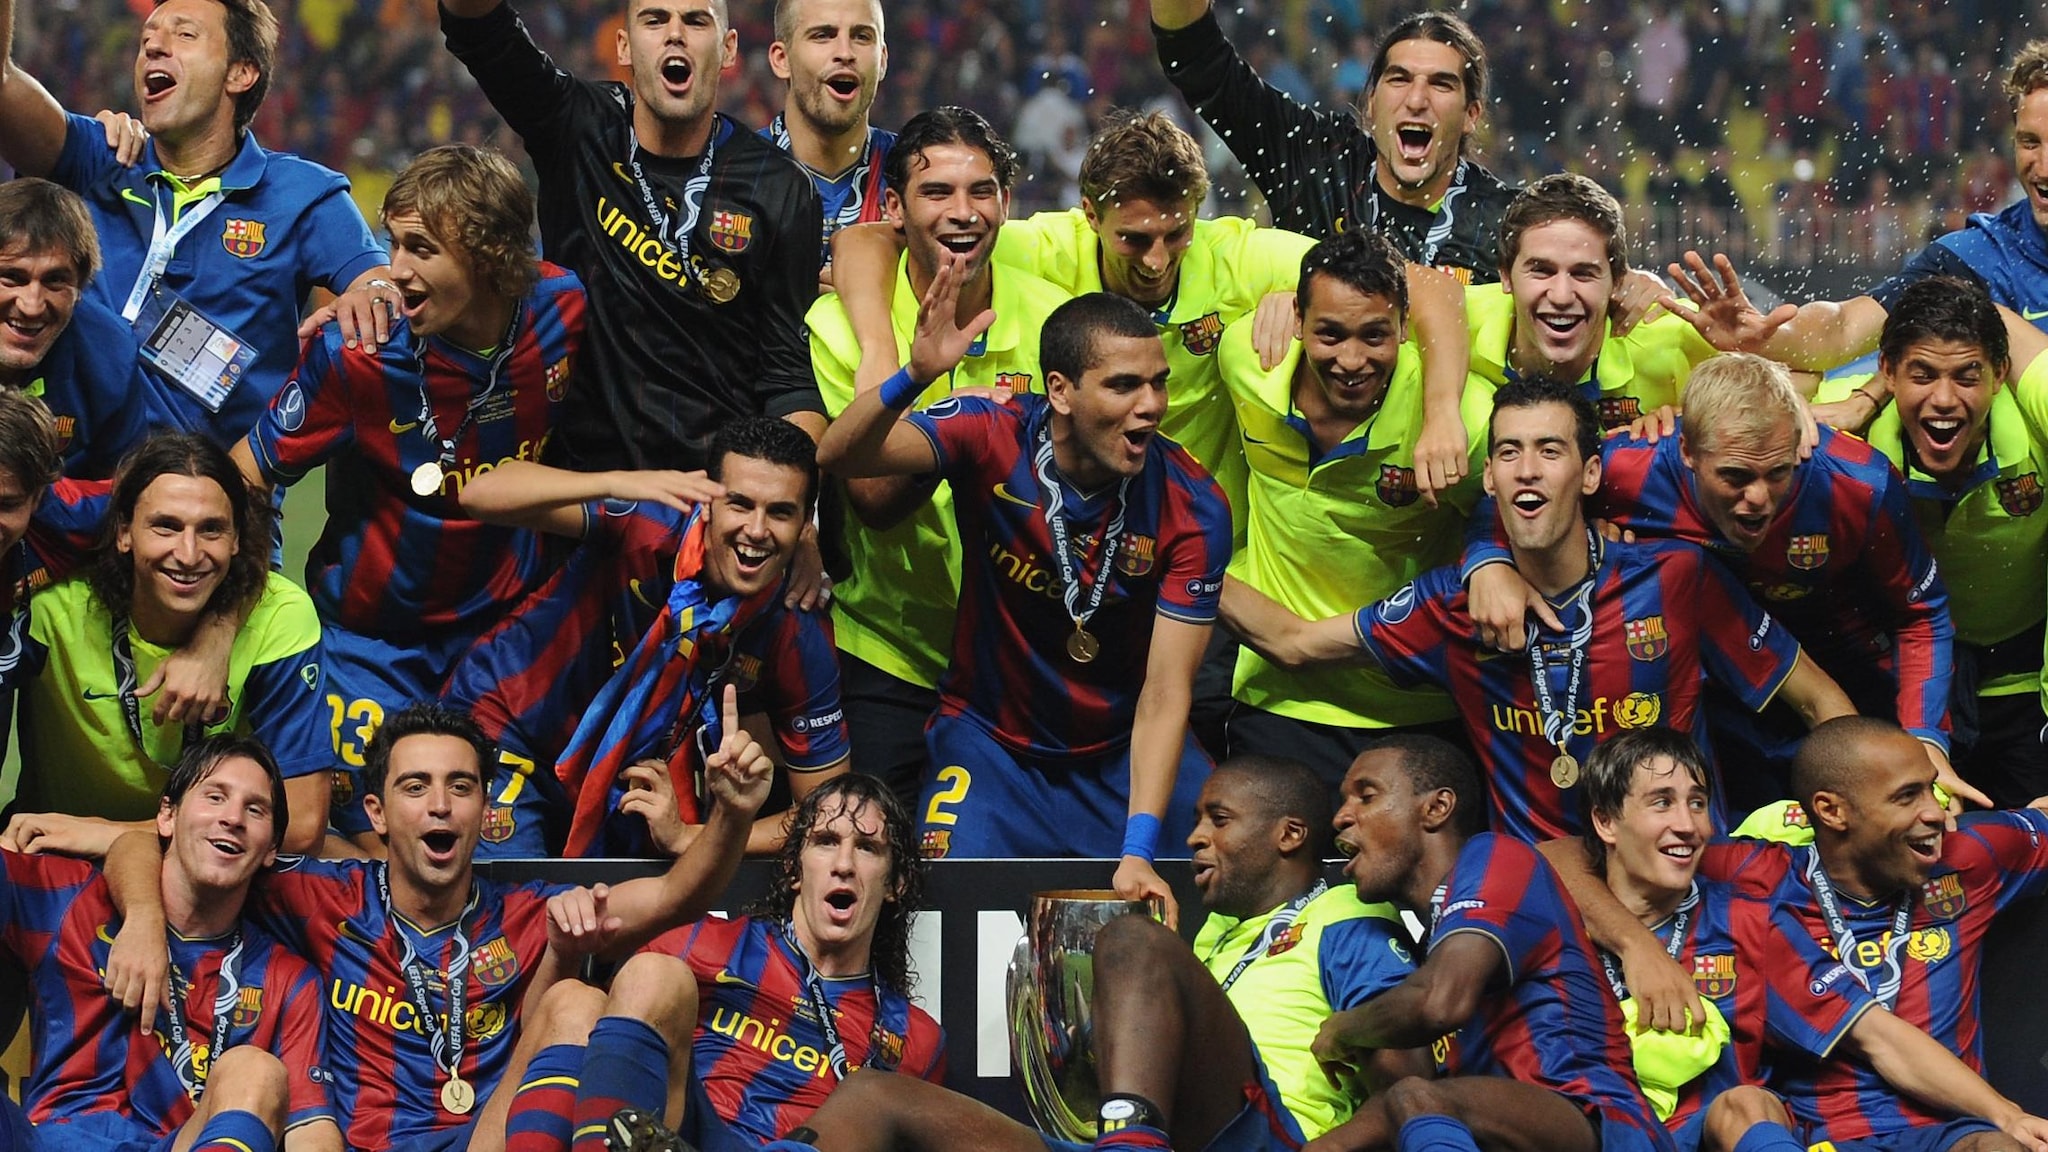 2009 Super Cup: Pedro pounces to add to Barça glory | UEFA Super Cup